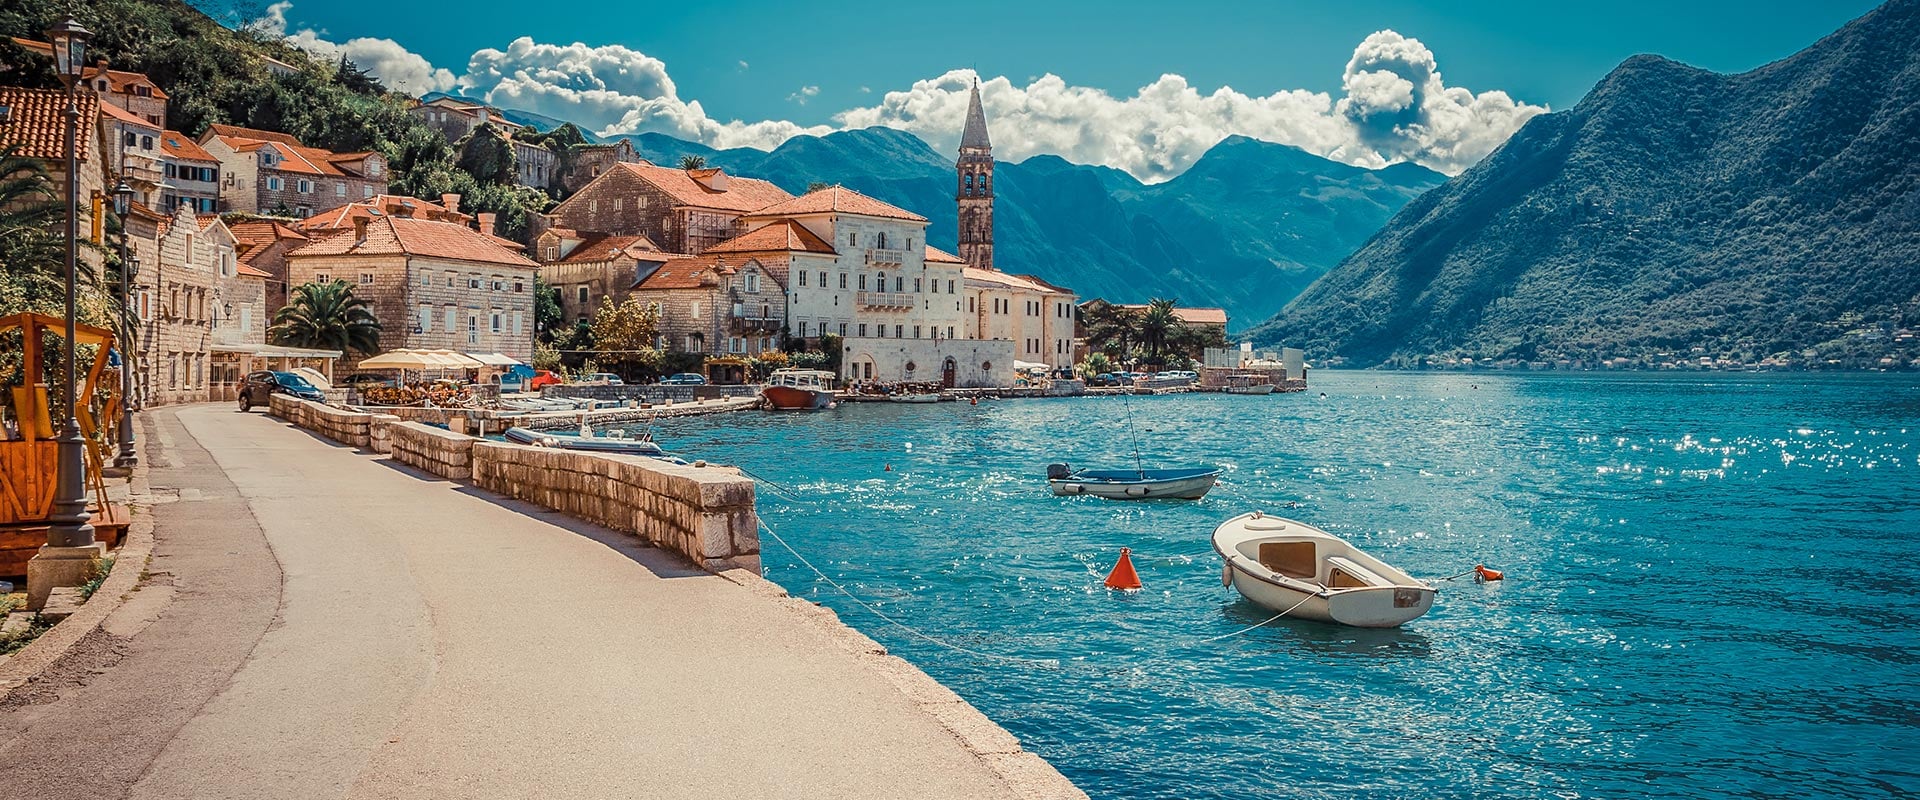 Small seaside village surrounded by mountains, Montenegro